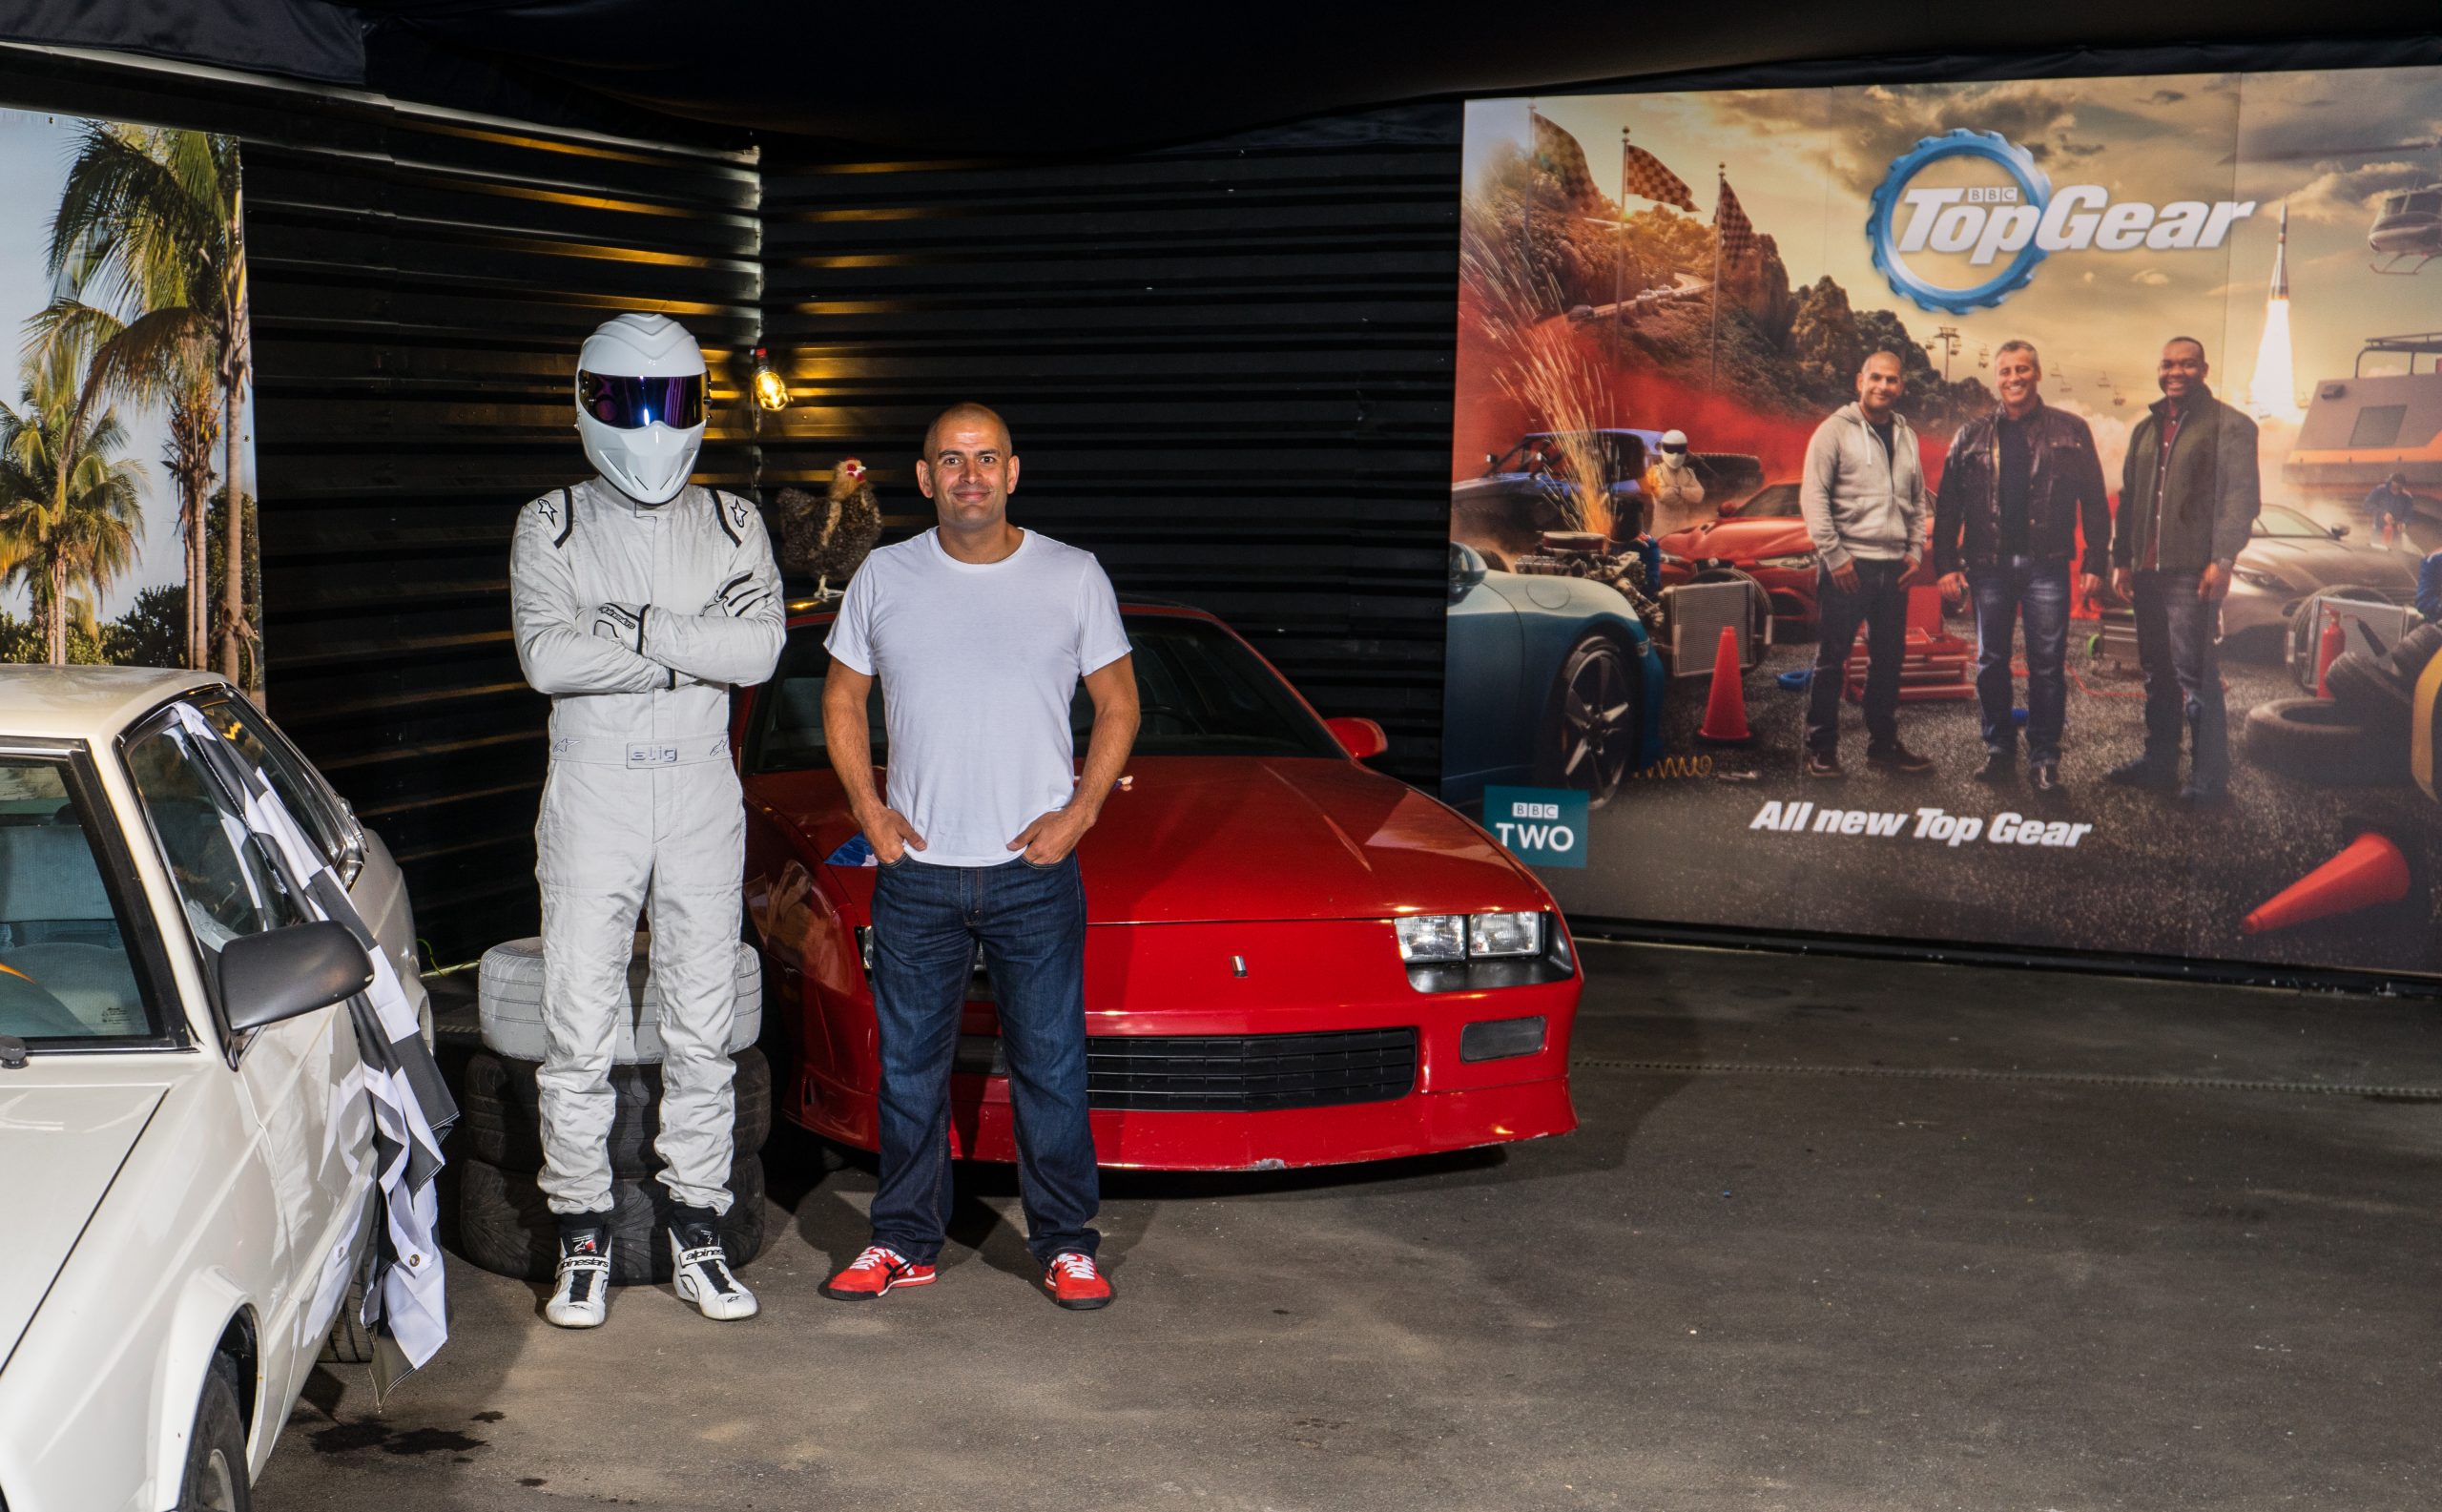 The Stig and Chris Harris with the Cube cars